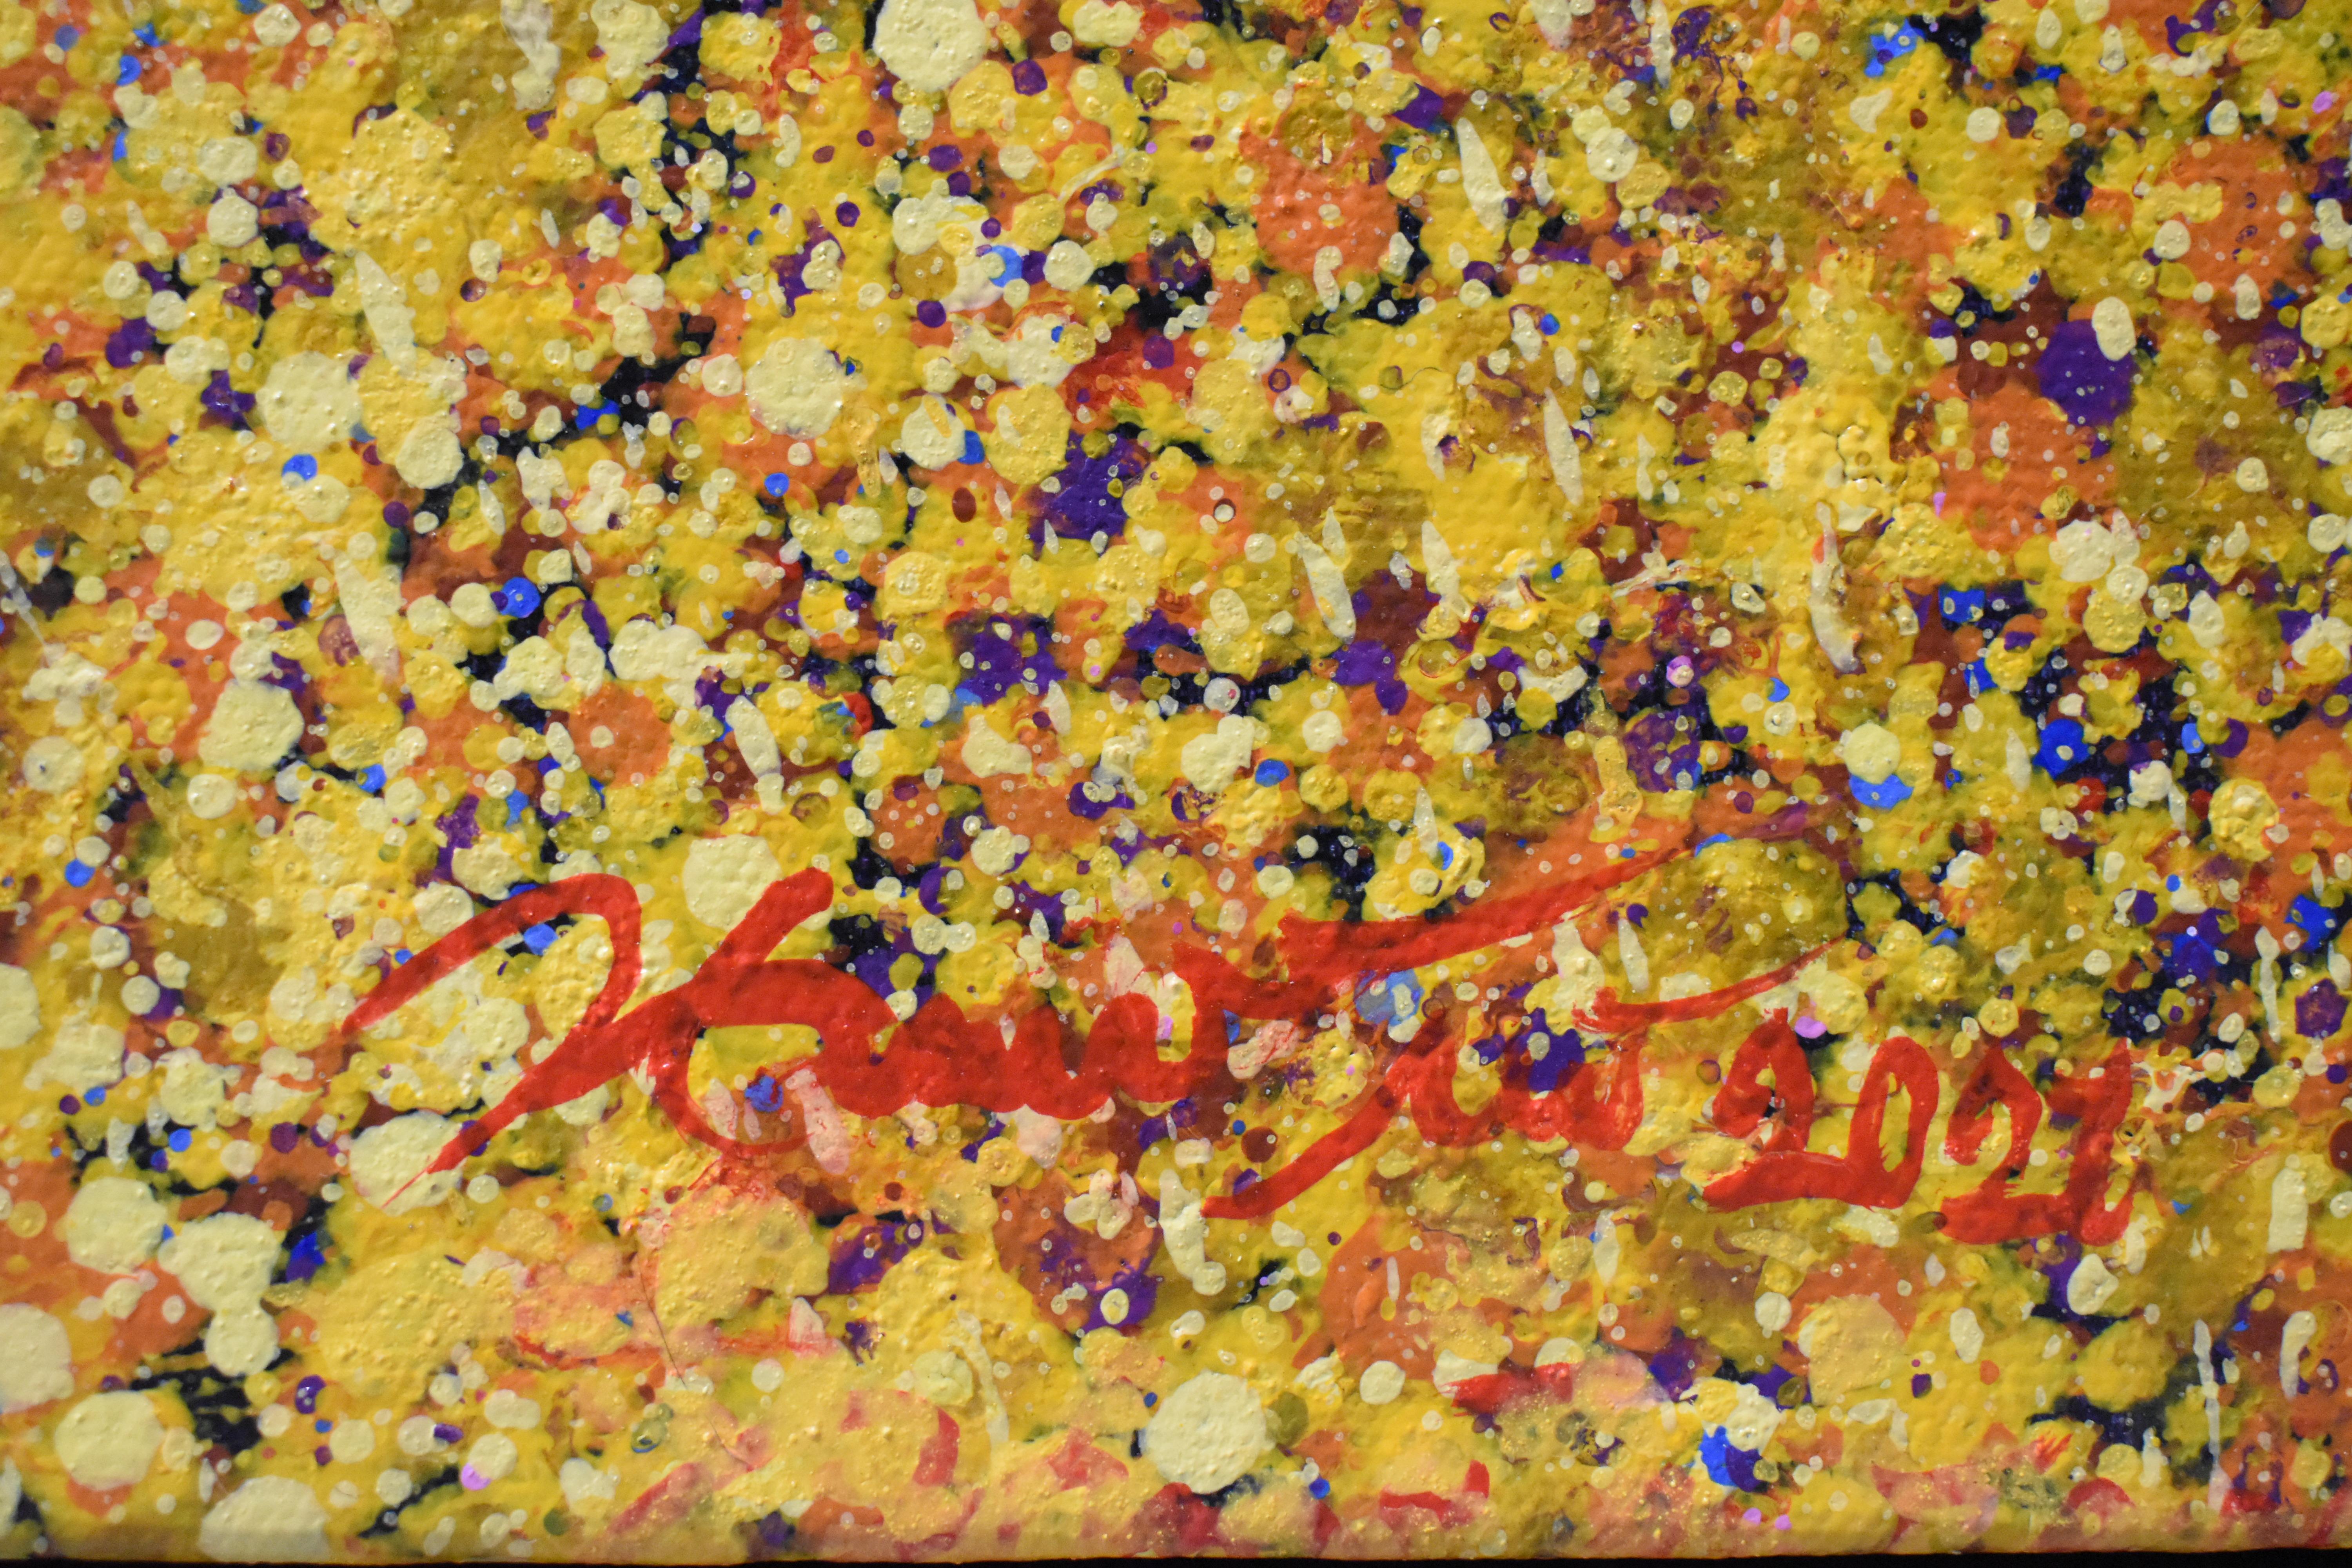 Forest Covers Gold Leafs Modern Impressionism and Pointilism by Narate Kathong 2